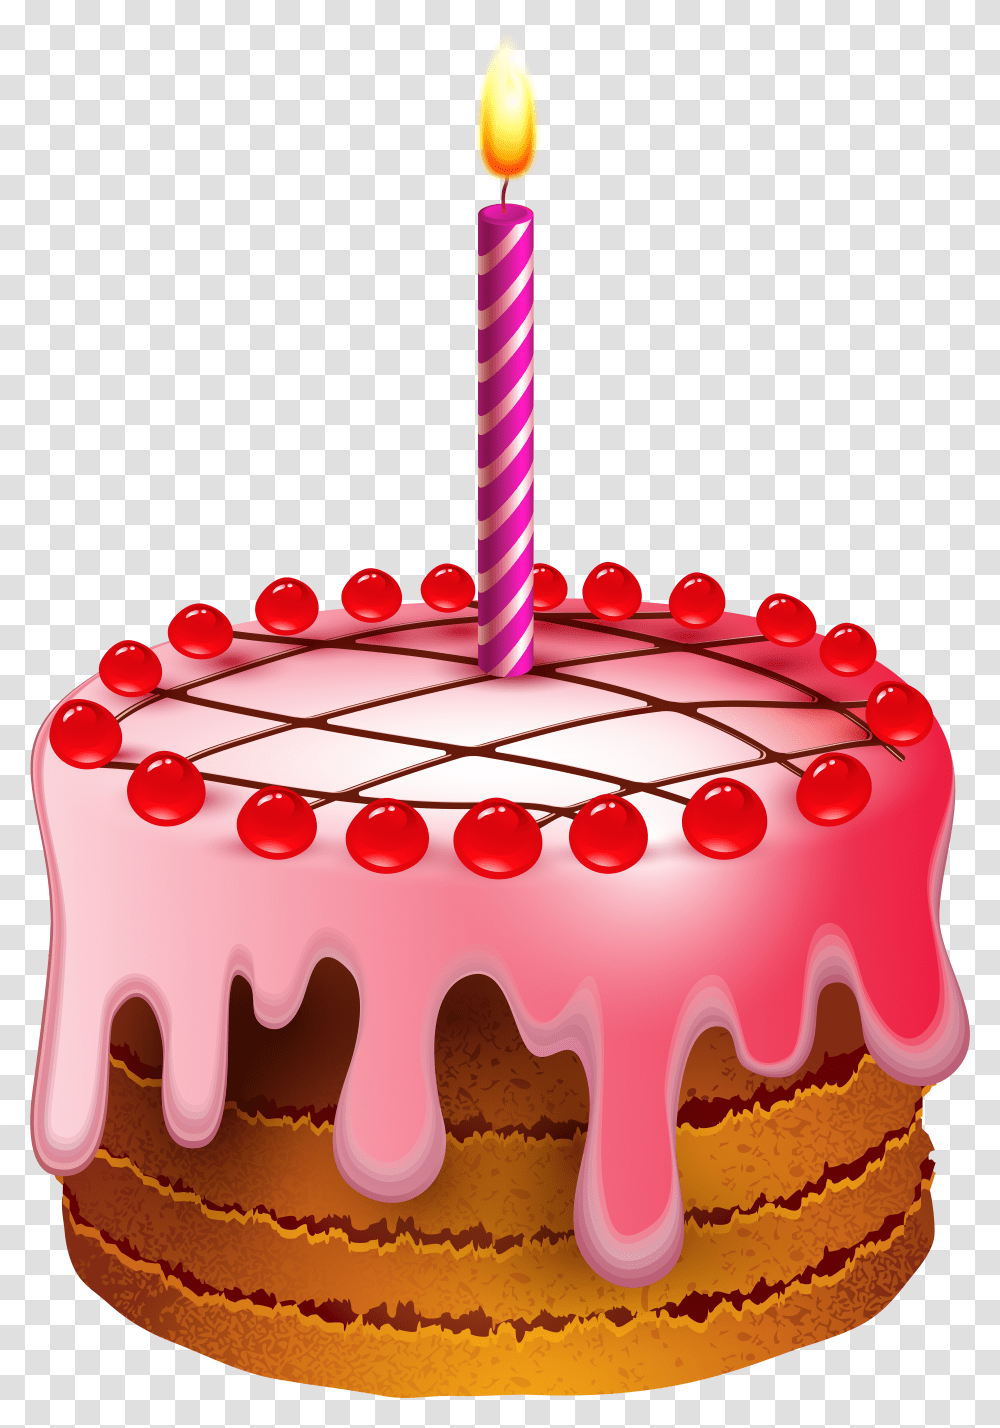 Christmas Birthday Cake Background Cake Clipart Transparent Png